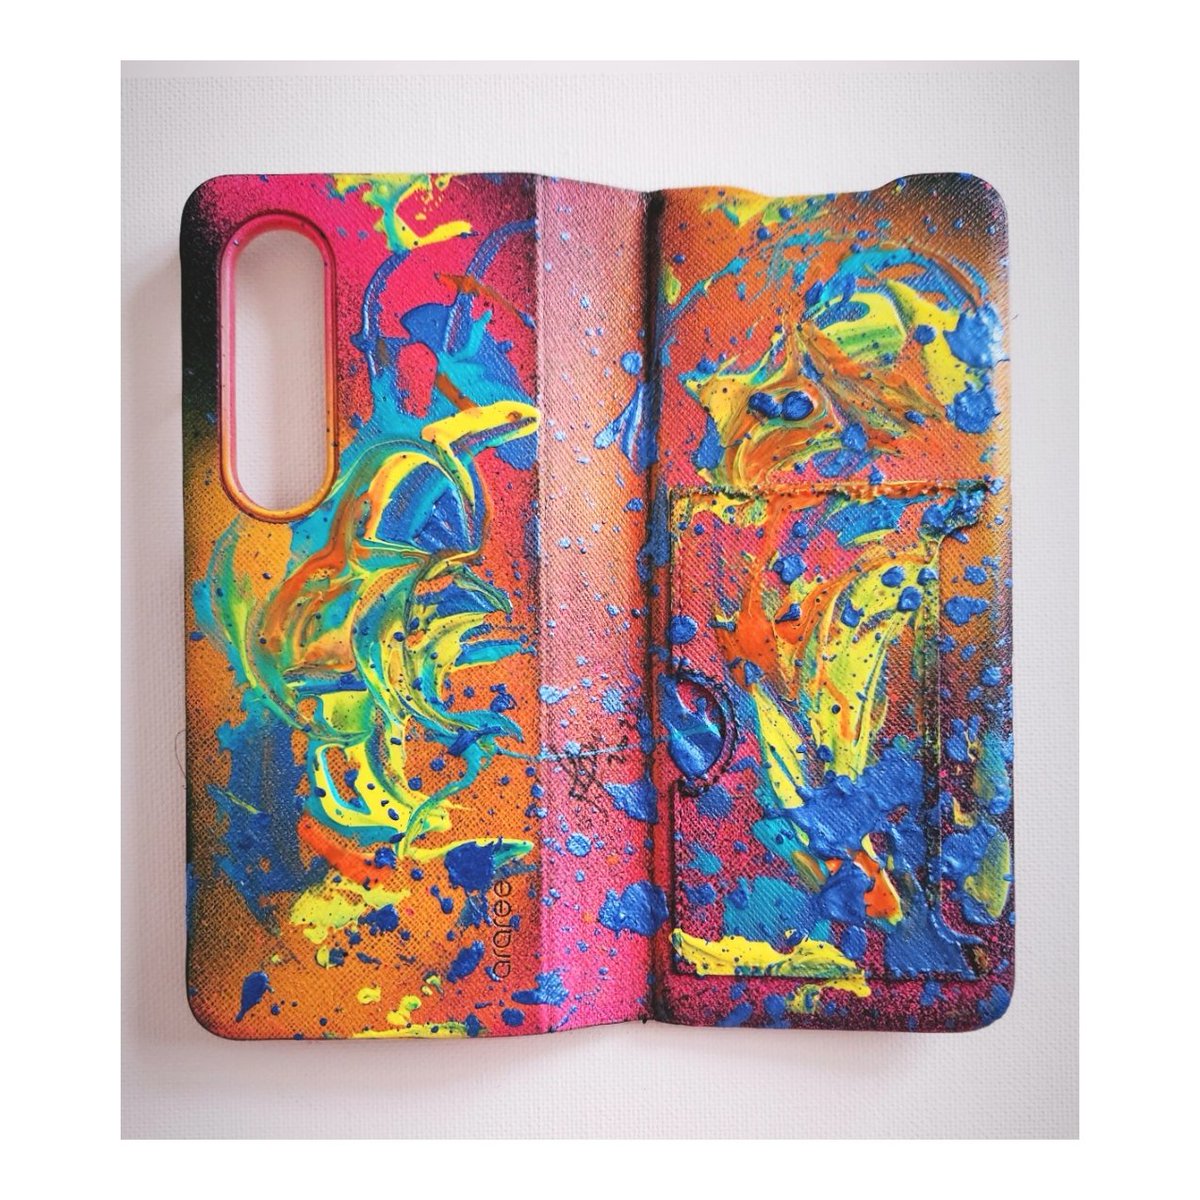 Aroused Passion 

Acrylic on leather phone cover

#decorcrushing #aboutfullmess #creativeprocess #willemdekooning #rumipoetry #abstractpainting #colorcrushcreative #interiordesignart #anthrohome #artistsoninstagram  #abstractart    #arousedpassion
#Blackpink
#96hrs #art